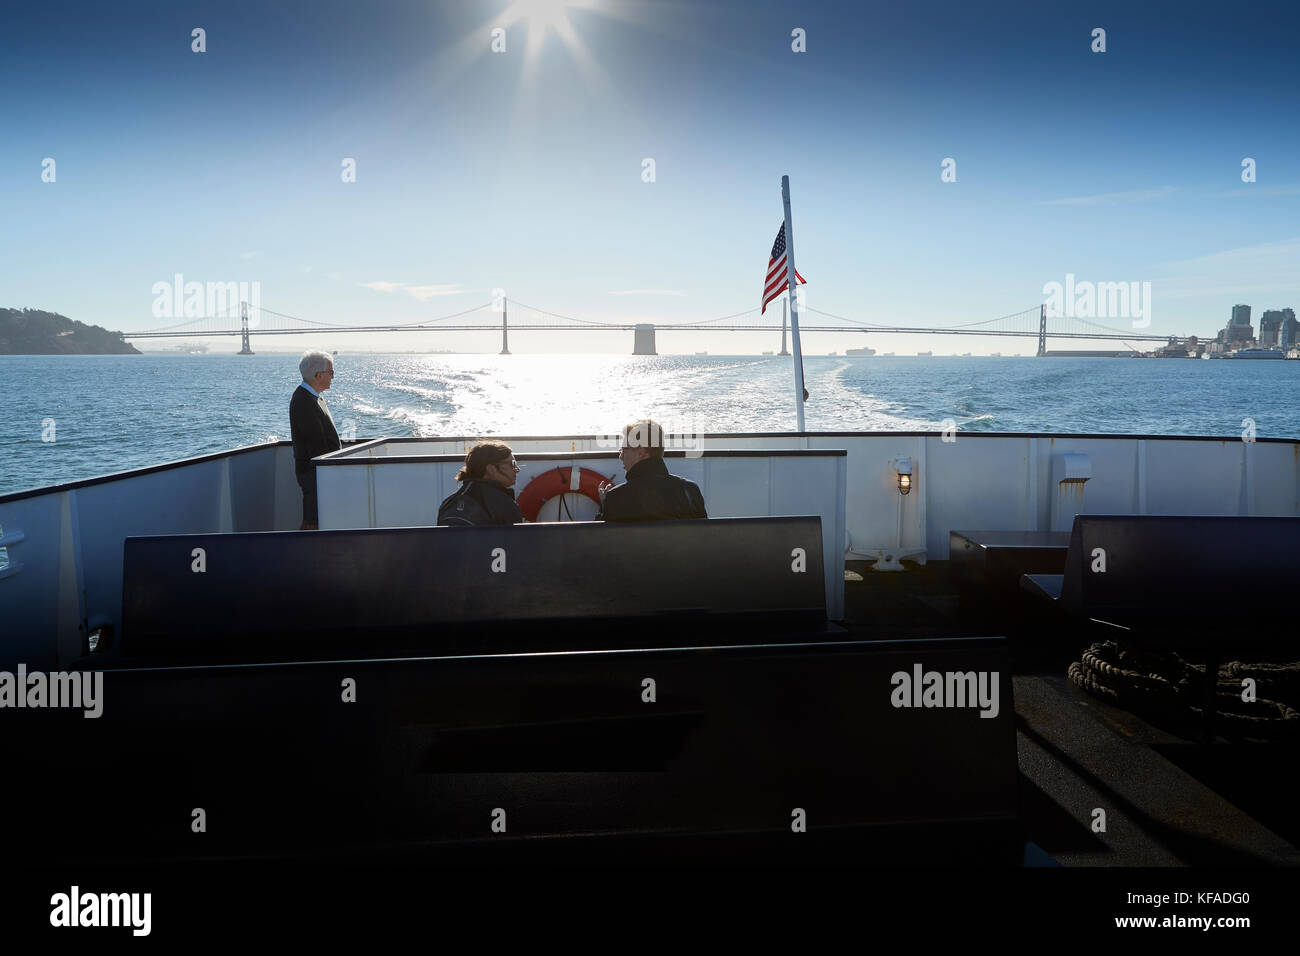 Looking Aft Towards The San Francisco-Oakland Bay Bridge From The Deck Of A Blue And Gold Fleet Ferry, Passengers Enjoying The Fine Weather And View. Stock Photo